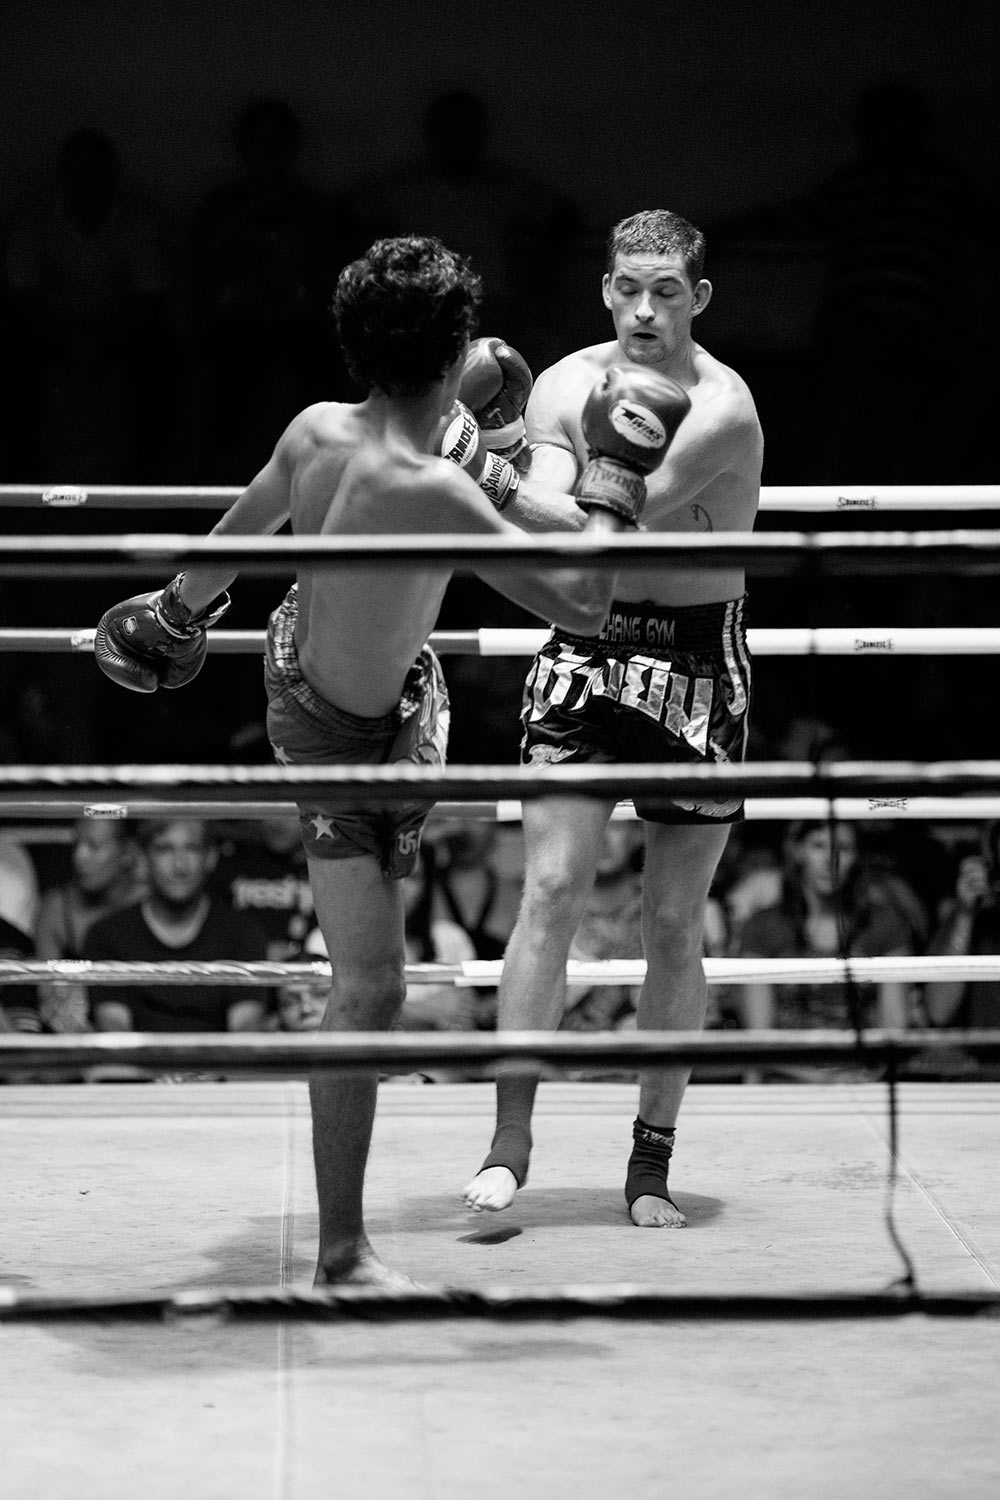 Muay Thai fighters in action.